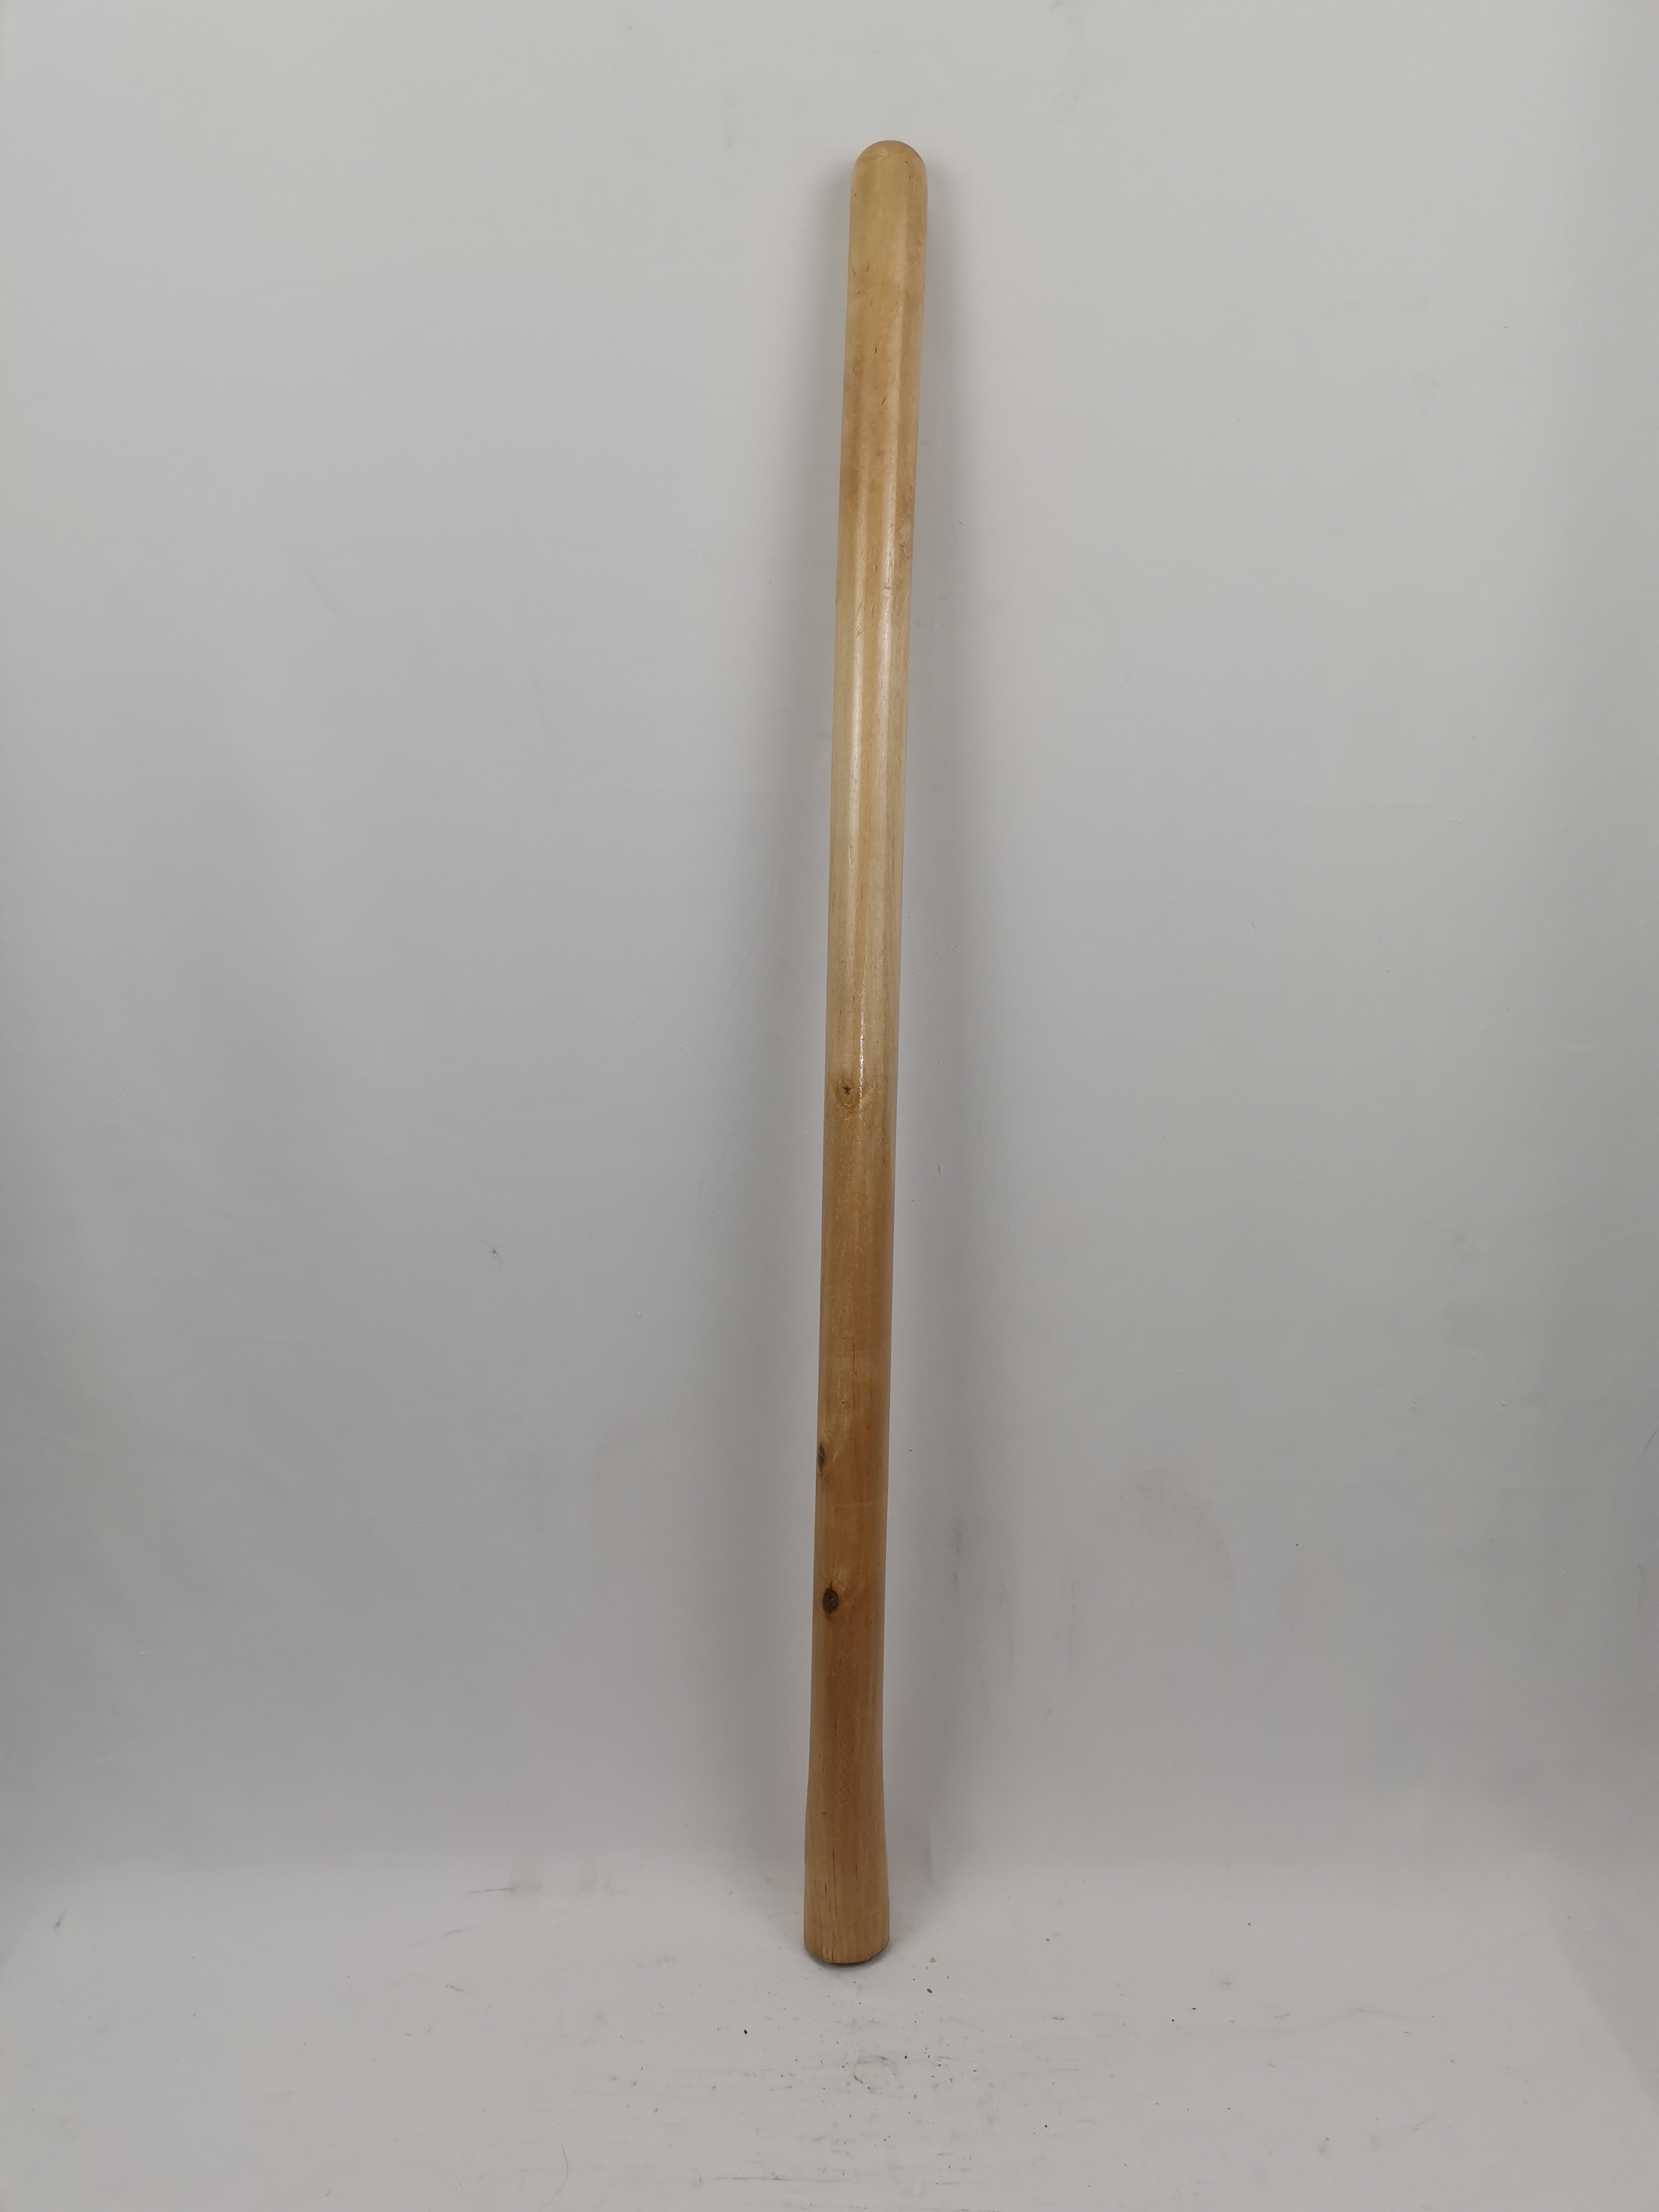 Two level hard miscellaneous wood hoe handle